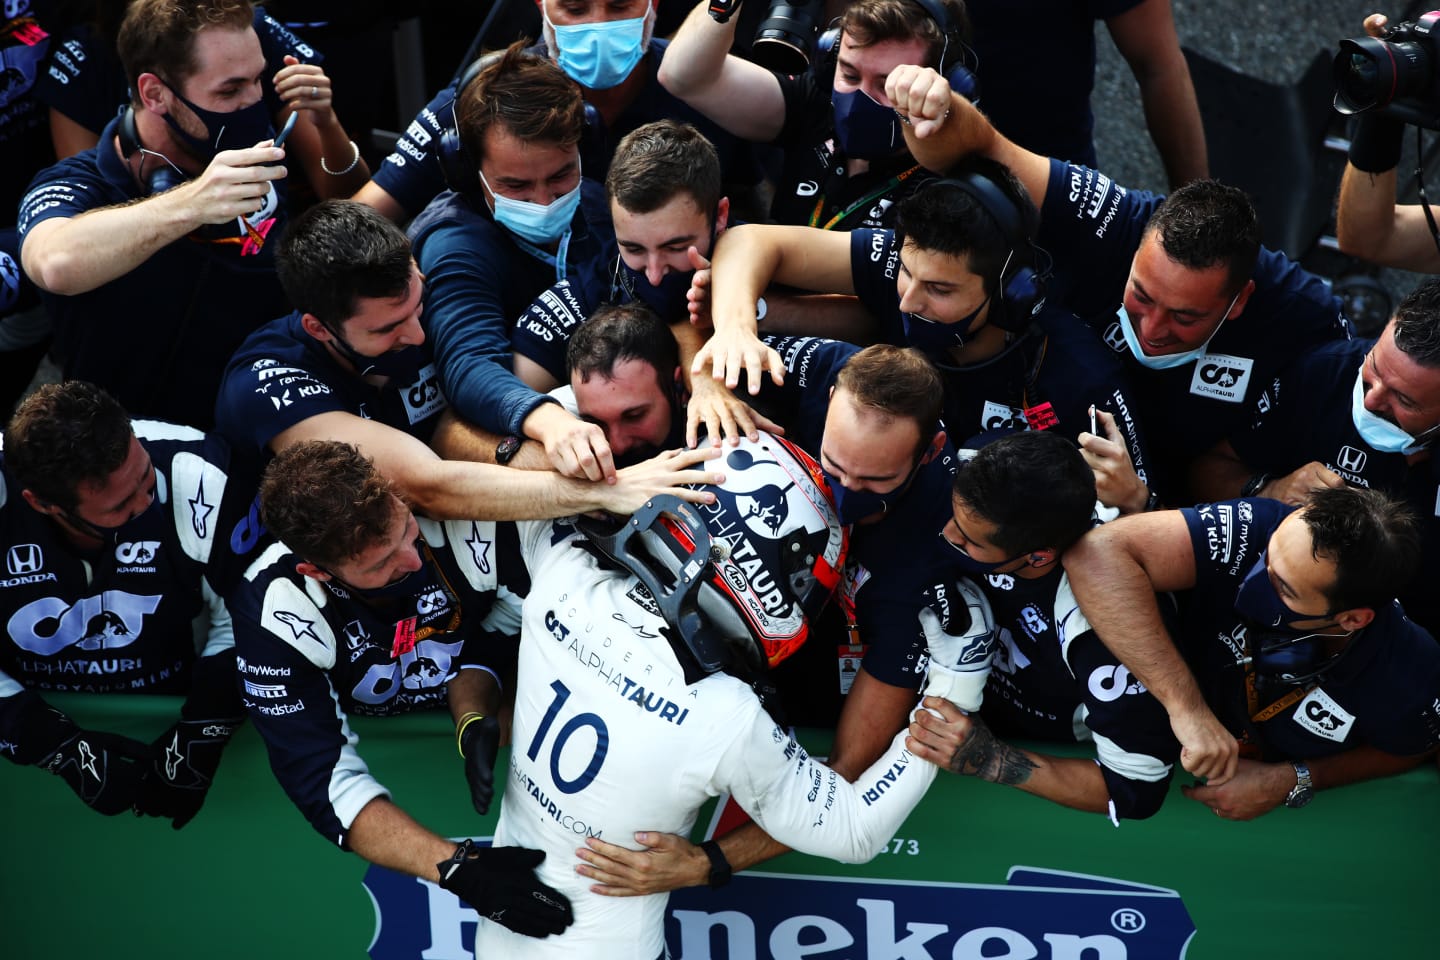 MONZA, ITALY - SEPTEMBER 06: Race winner Pierre Gasly of France and Scuderia AlphaTauri celebrates with team members in parc ferme during the F1 Grand Prix of Italy at Autodromo di Monza on September 06, 2020 in Monza, Italy. (Photo by Mark Thompson/Getty Images)